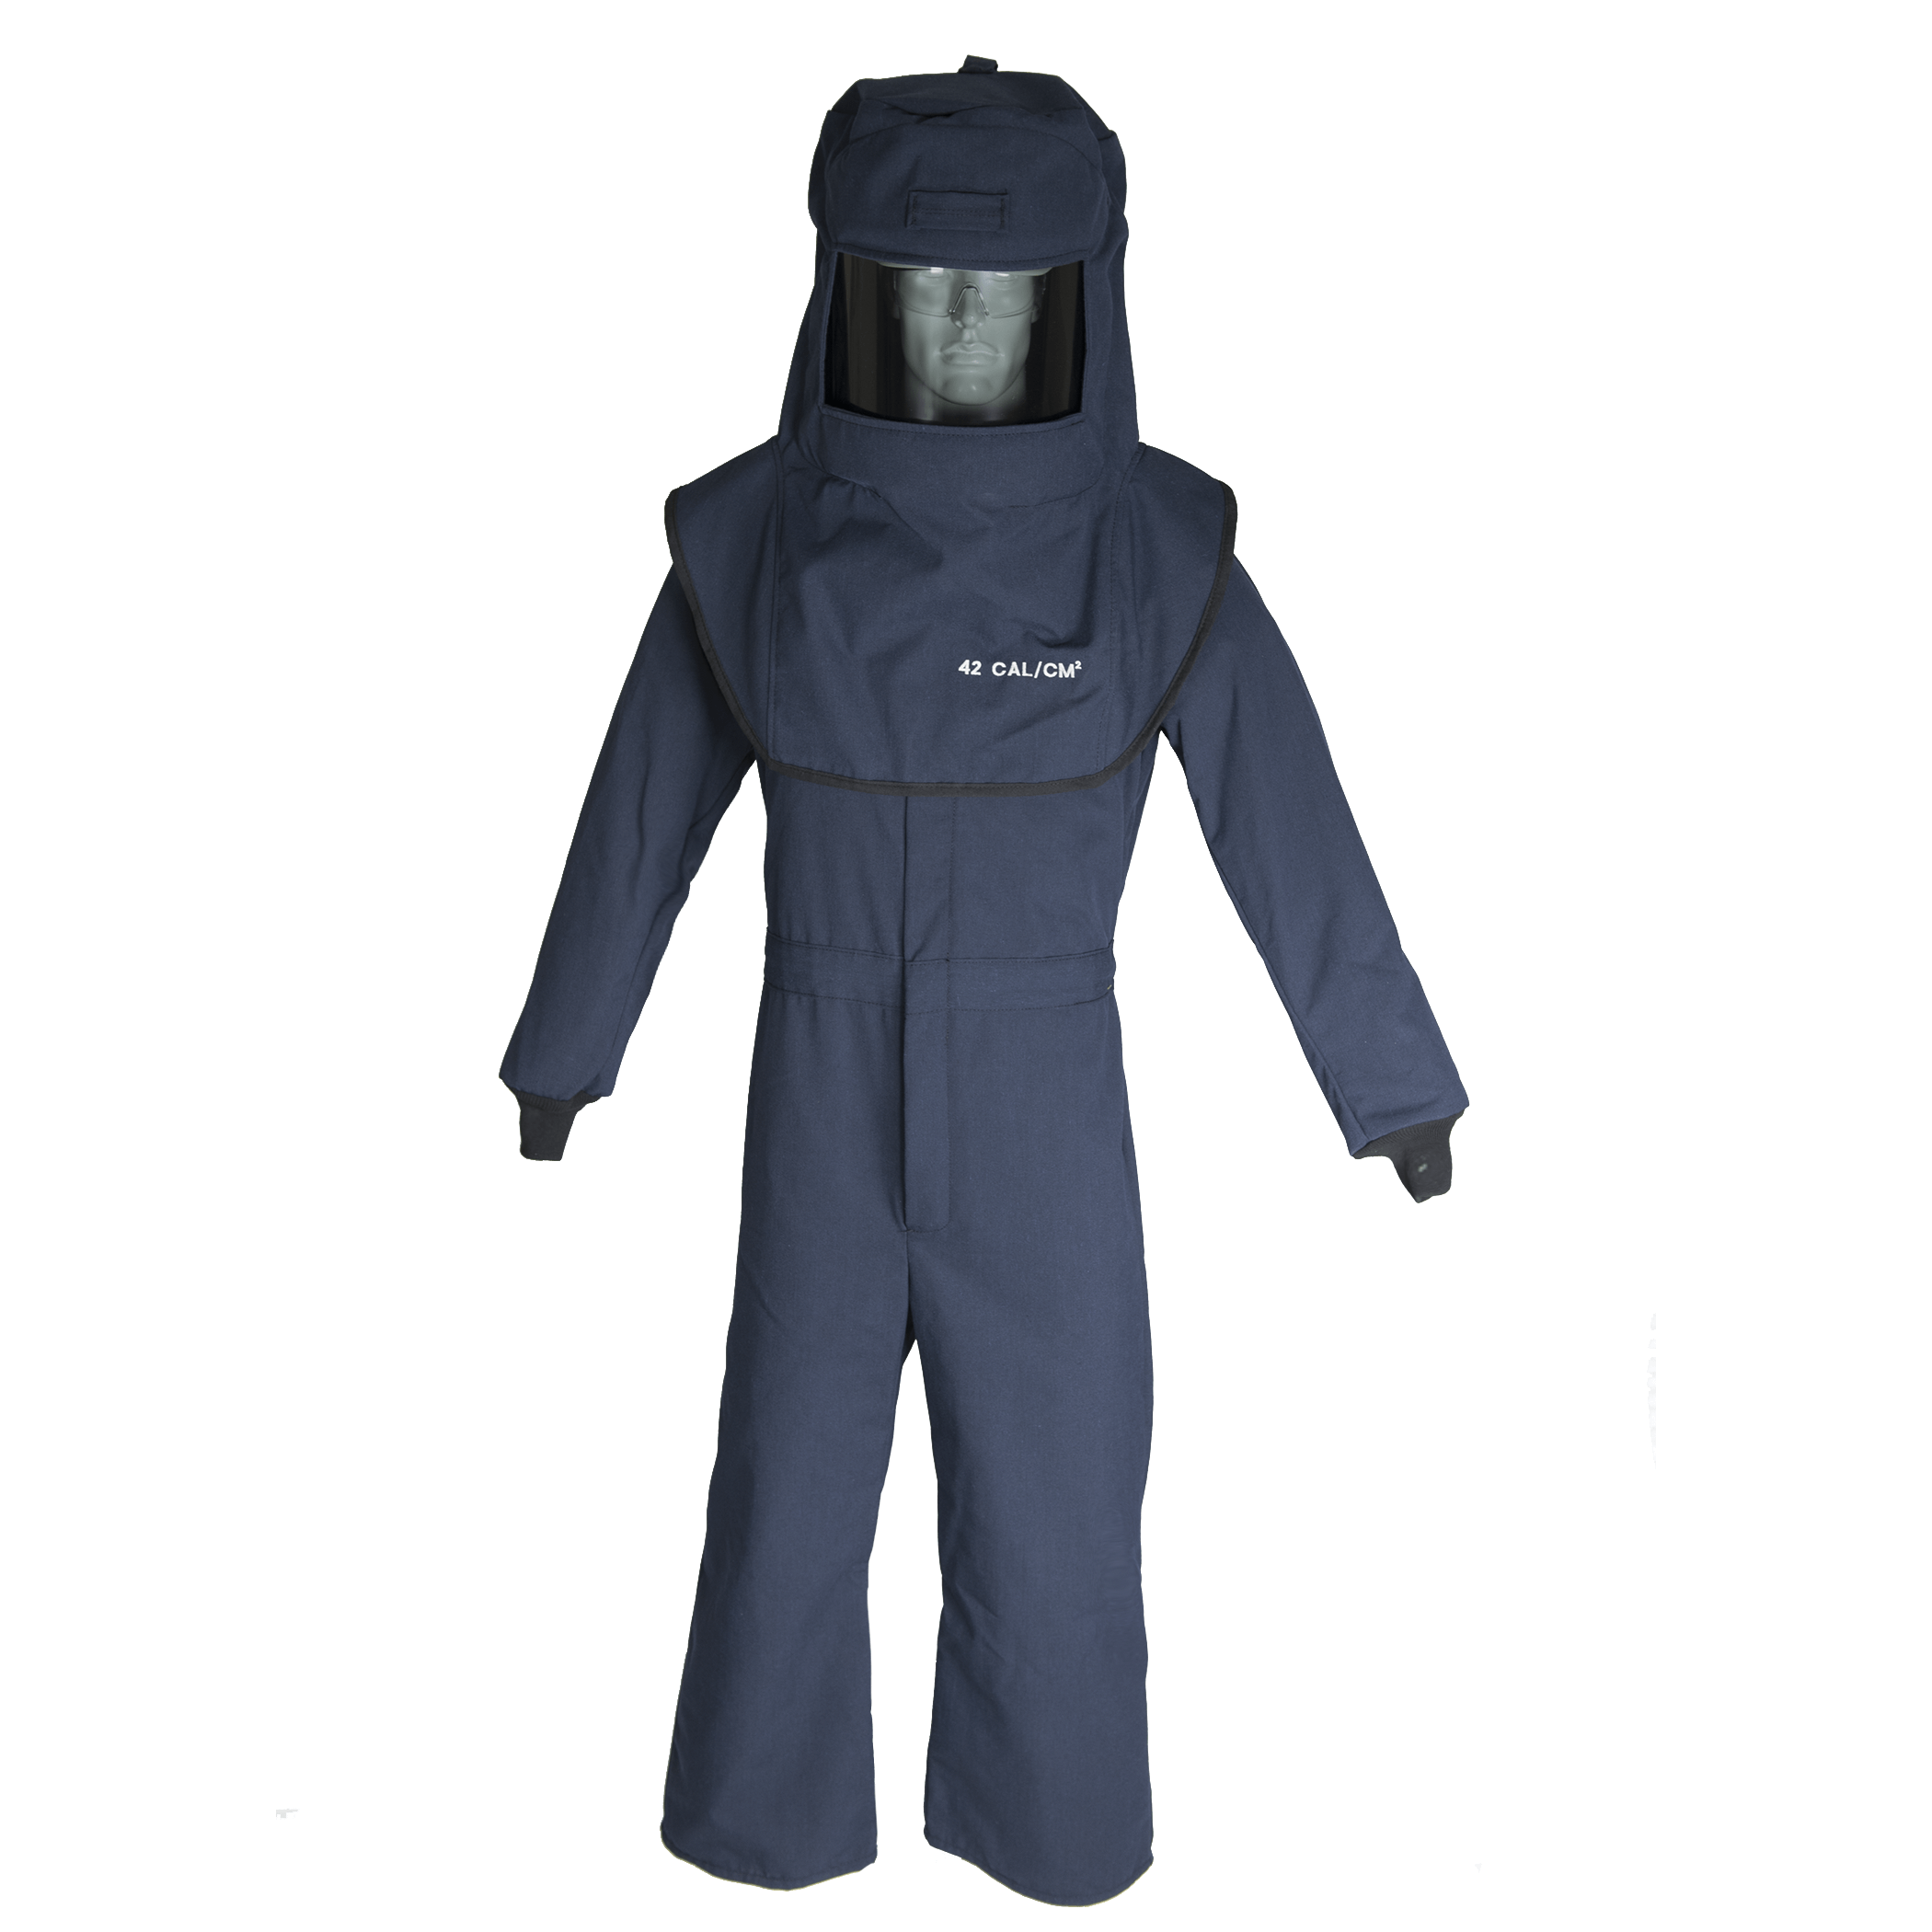 40 Cal LAN™ Arc Flash Hood and Coverall Suit Set - 5X-Large / With HVSL